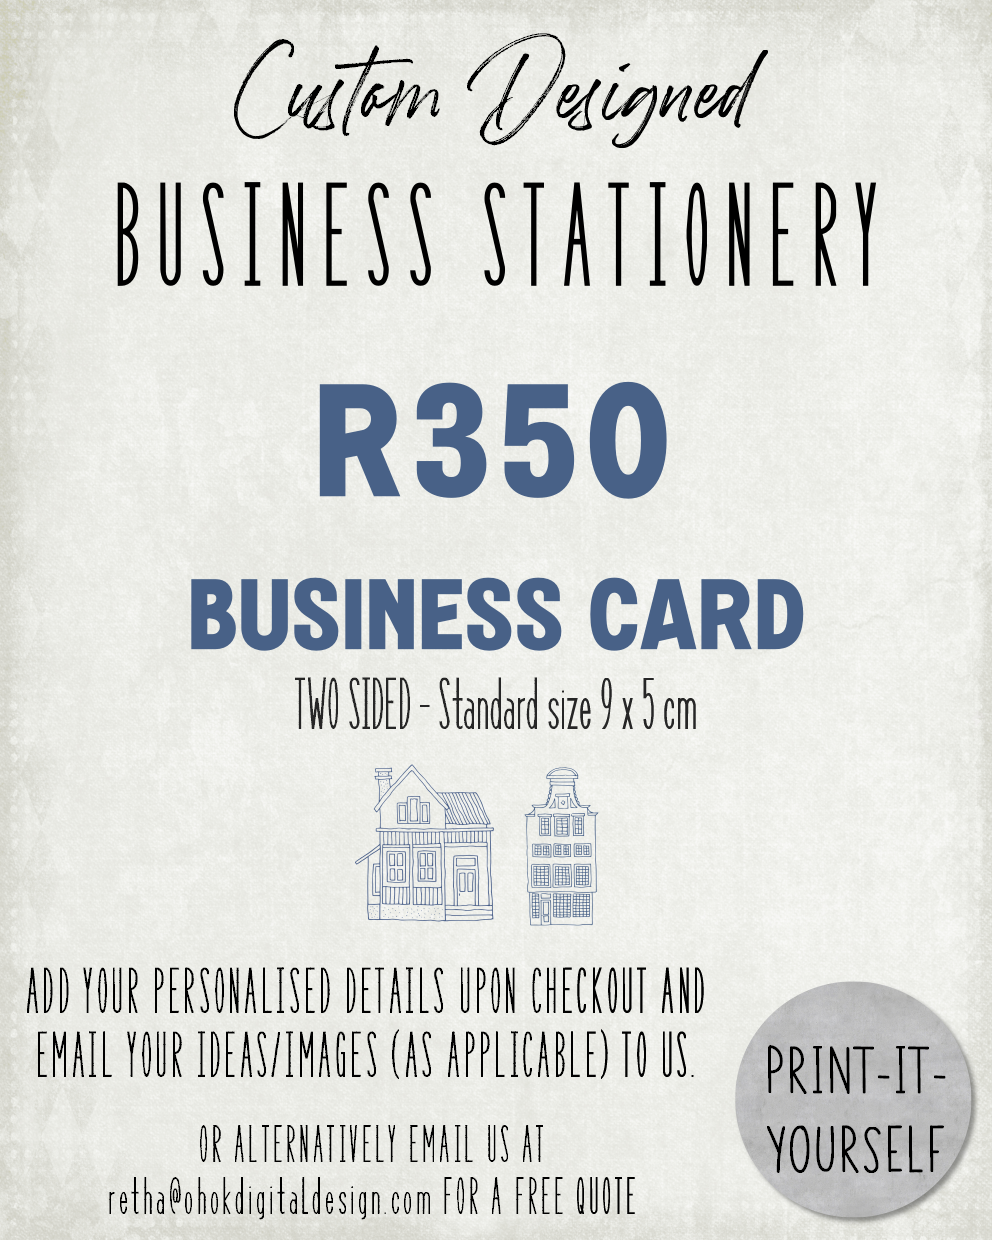 CUSTOM DESIGNED:  Business Stationery - Business Card (two-sided)